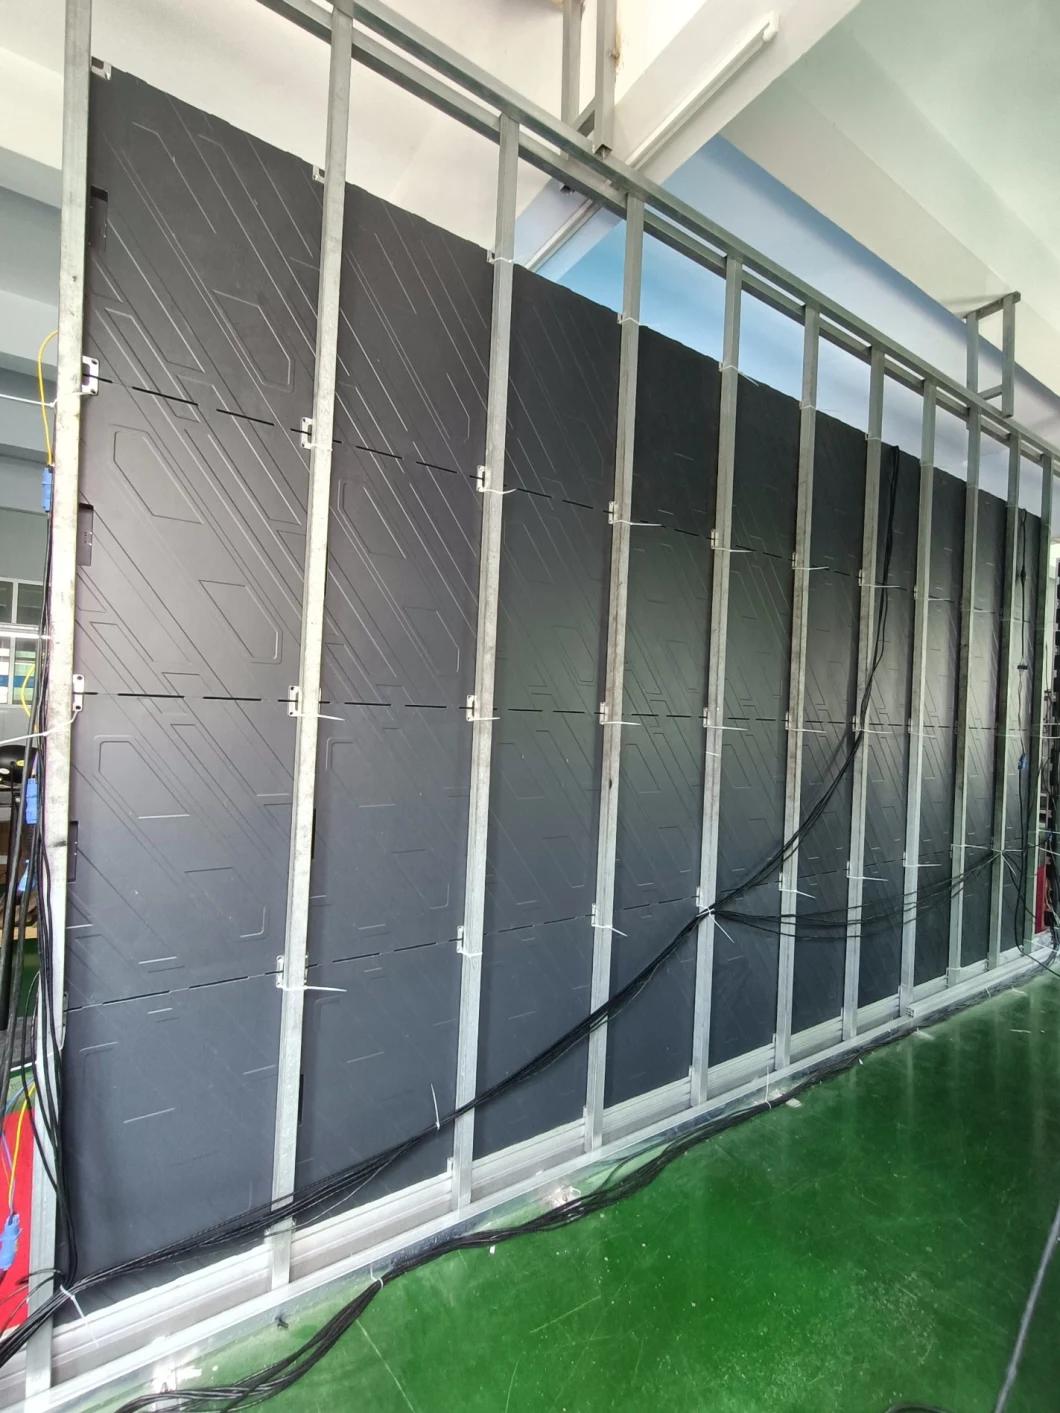 Ultra HD Indoor Seamless LED Video Wall Studio Small Pixel Pitch P1.86p2 P2.5 LED Display